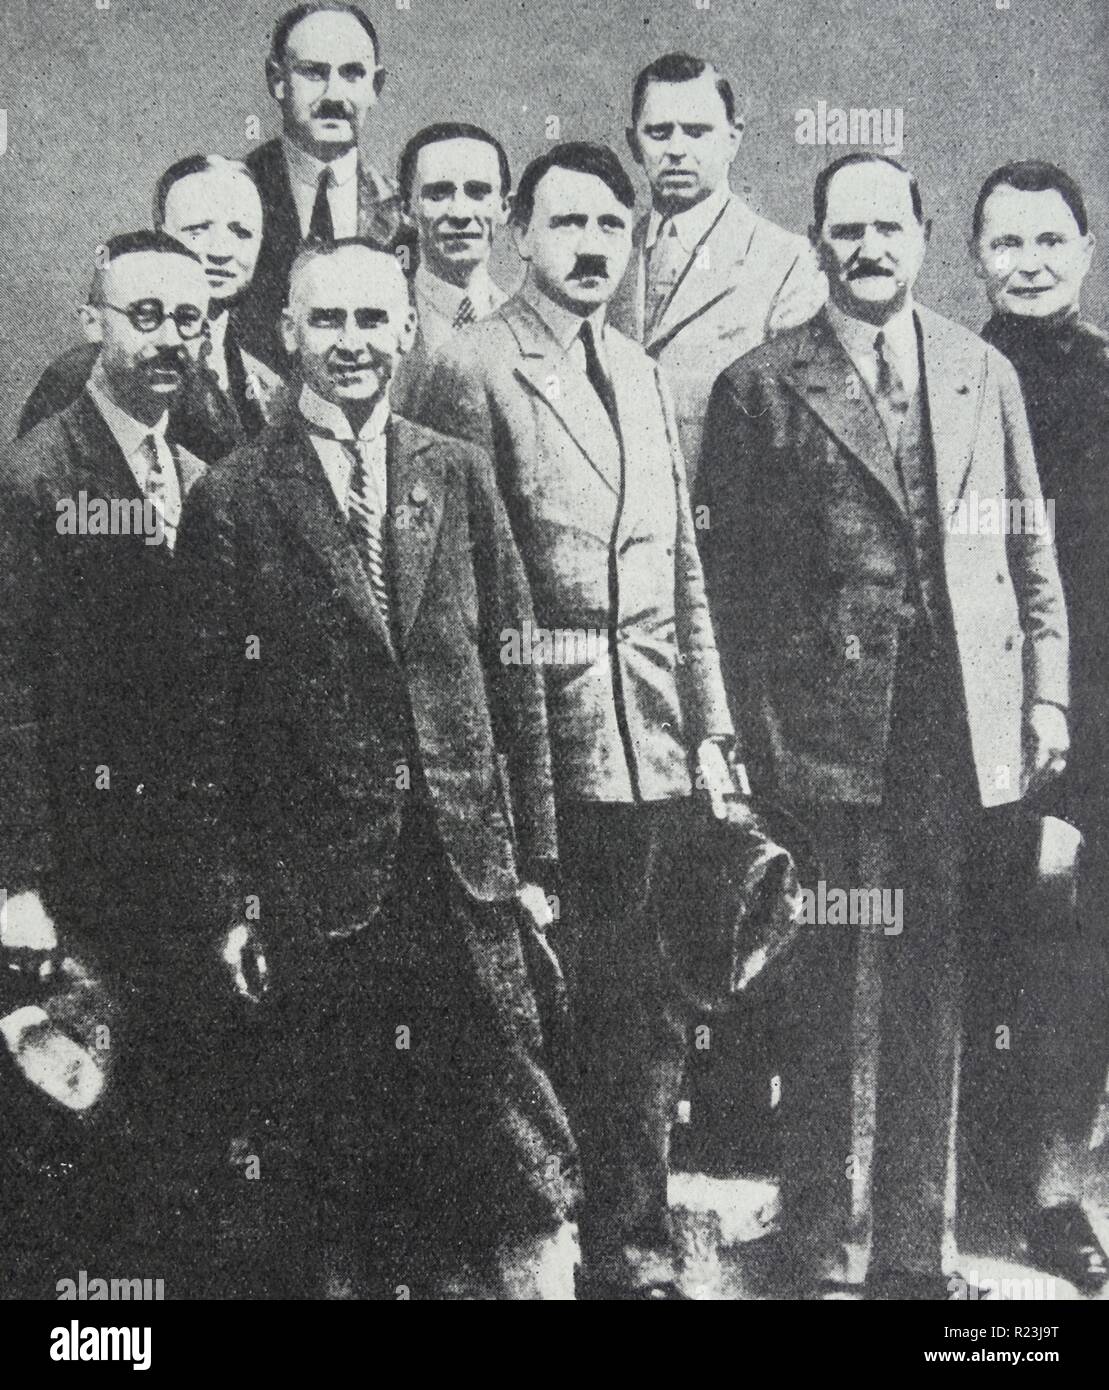 Photograph of the Nazi leaders before they came into power. First row left to right: Himmler, Chief of the Gestapo; Frick, Minister of the Interior; Fuehrer Adolf Hitler; General Von Epp, President of Colonial League; and Field-Marshal Goering. Back row left to right: Mutschmann Governor of Saxony; Josef Goebbels, Minister of Propaganda; Heydebreck. In the rear is Bernhard Rust, Minister of Education. Dated 1932 Stock Photo